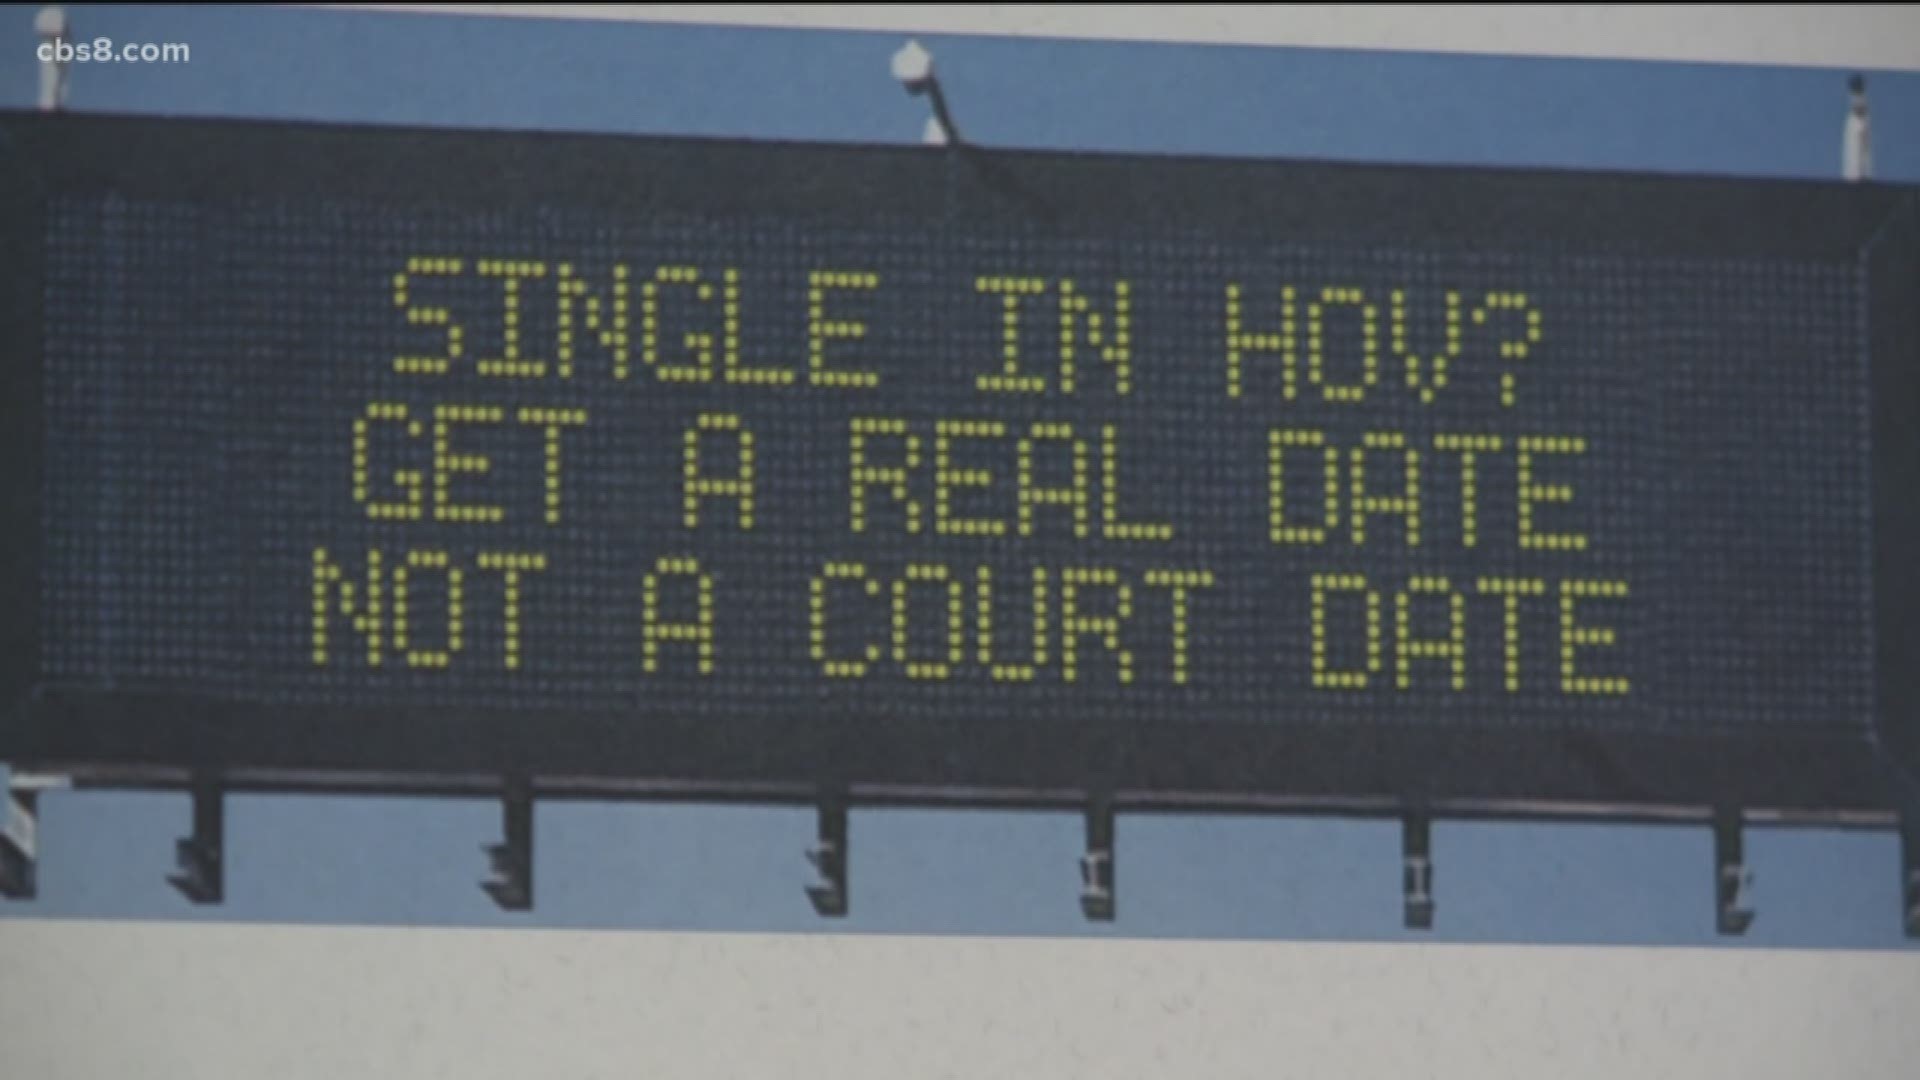 The witty messages that range from urging drivers not to litter to not driving under the influence can be seen throughout San Diego freeways.